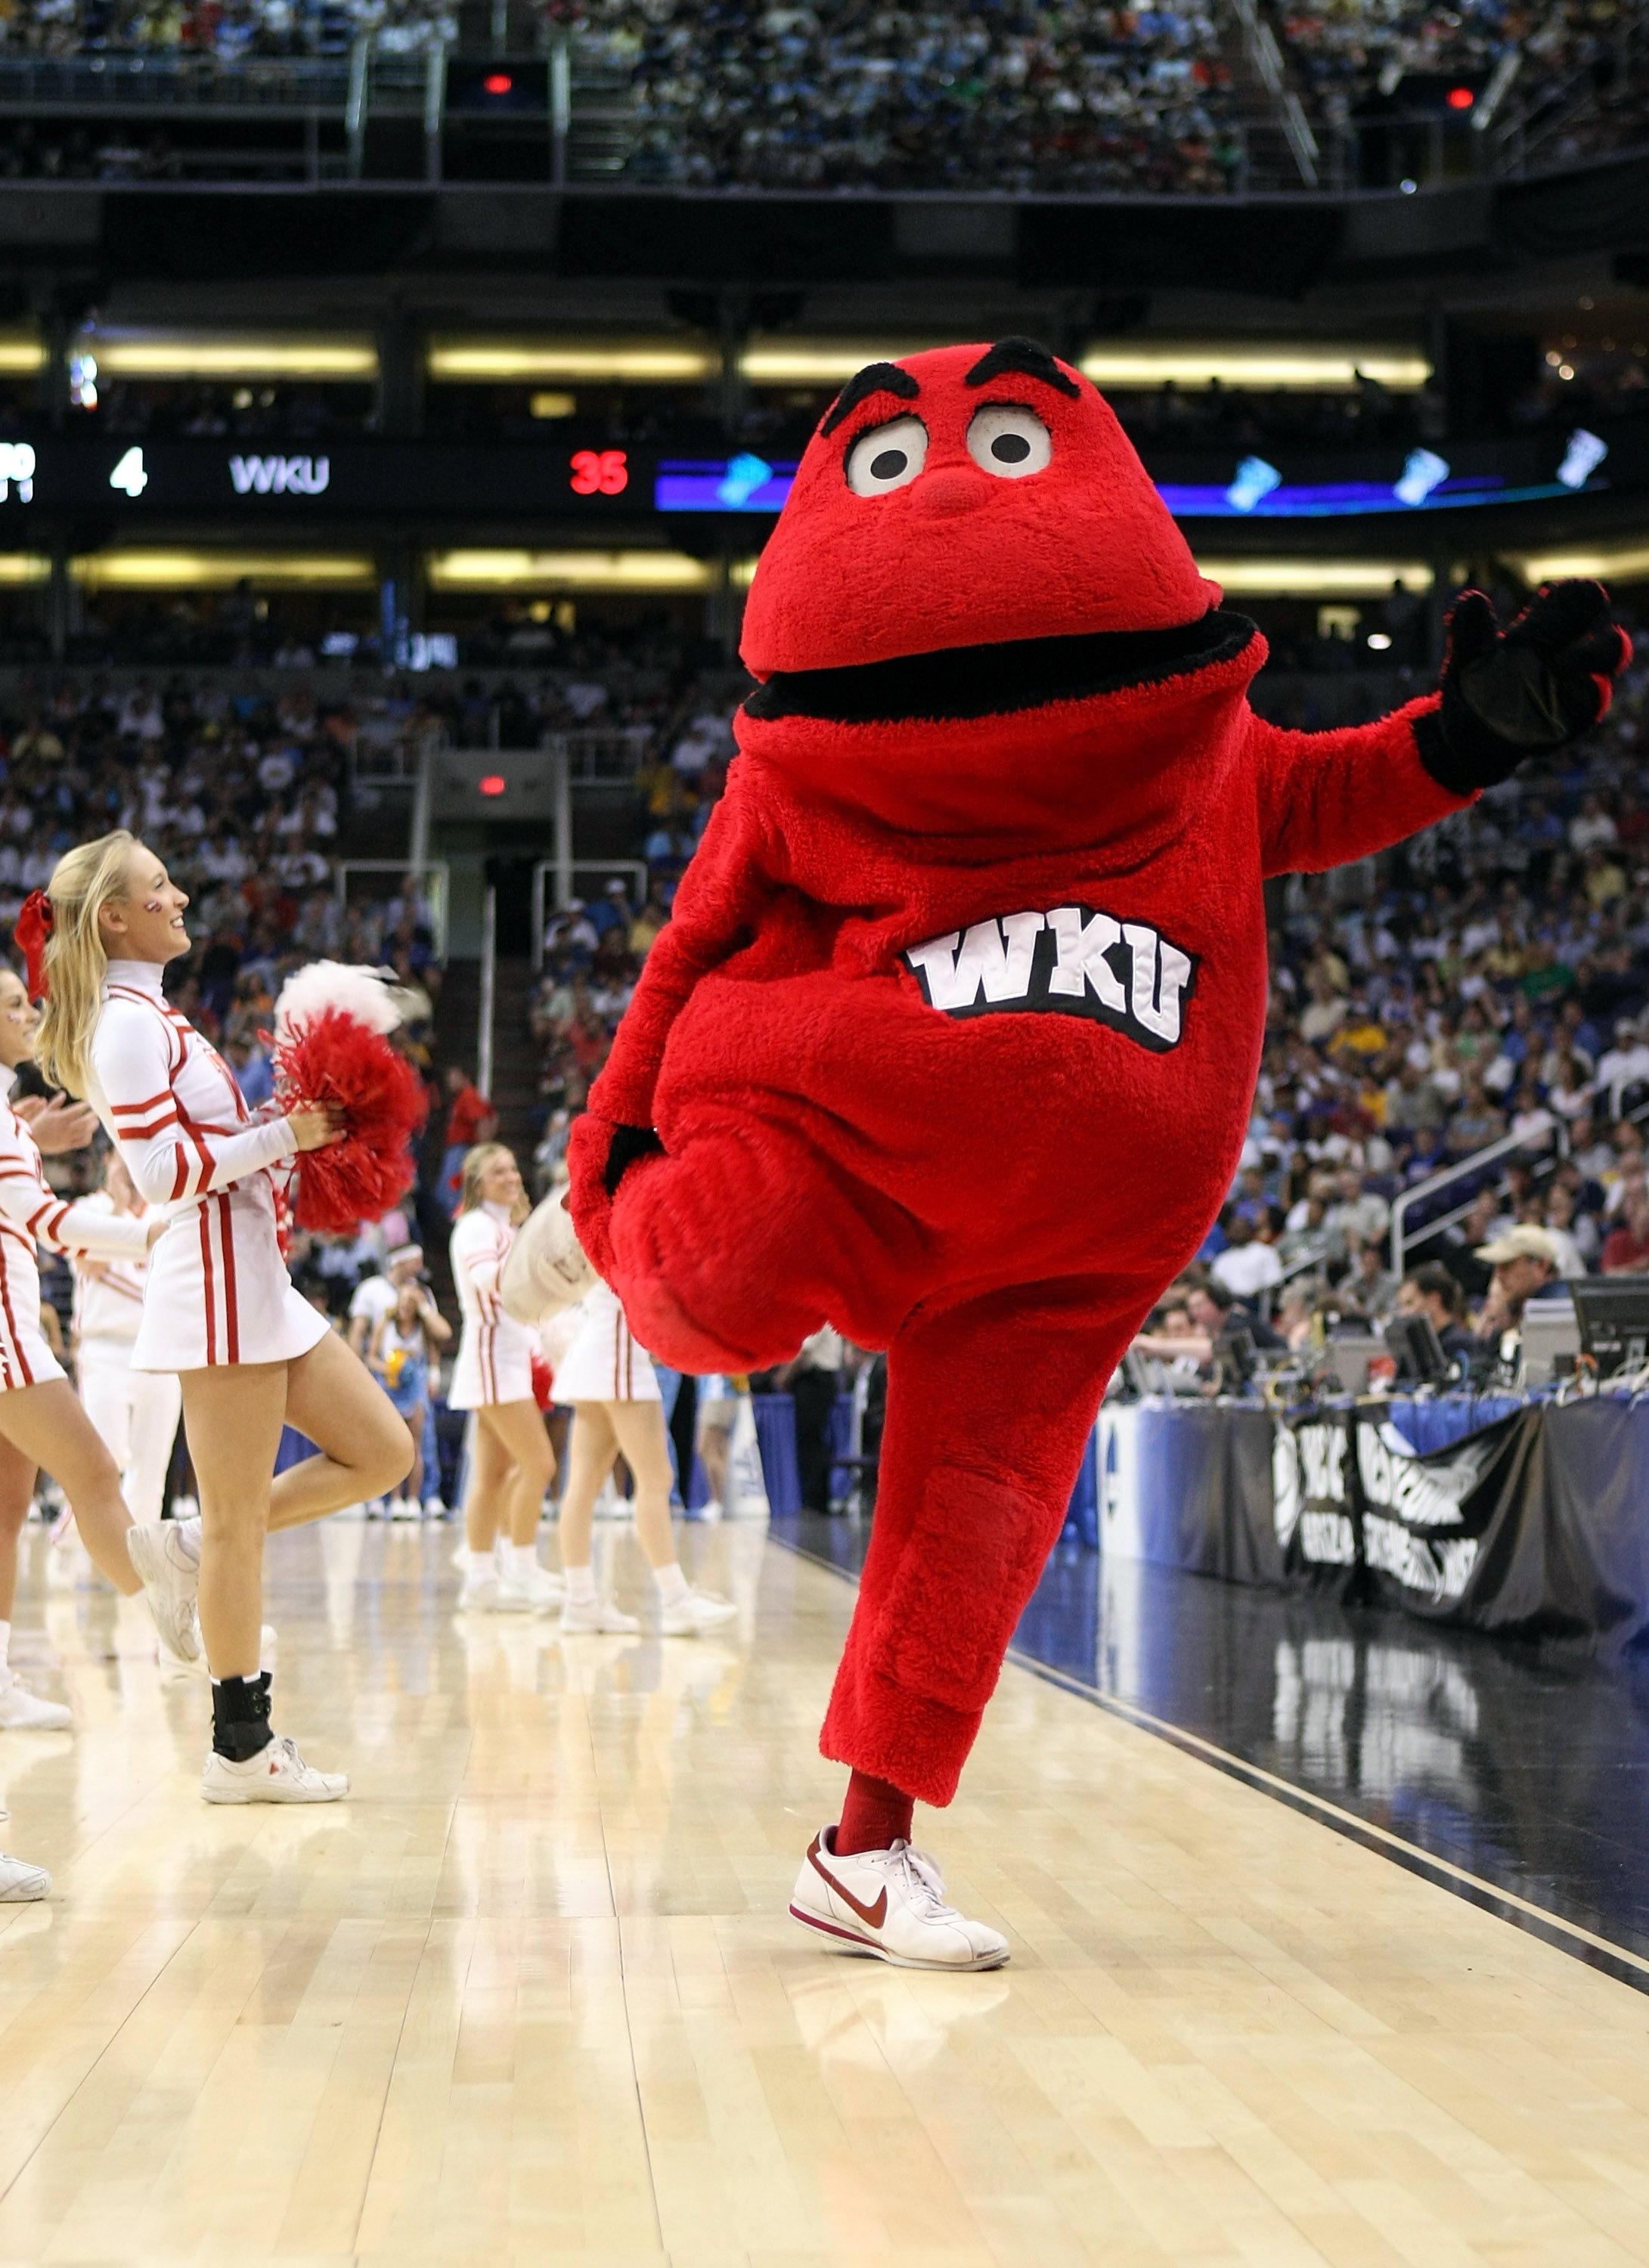 PHOENIX - MARCH 27:  The Western Kentucky Hilltoppers mascot attends the West Regional Sweet 16 game against the UCLA Bruins at the U.S. Airways Center on March 27, 2008 in Phoenix, Arizona.  (Photo by Stephen Dunn/Getty Images)